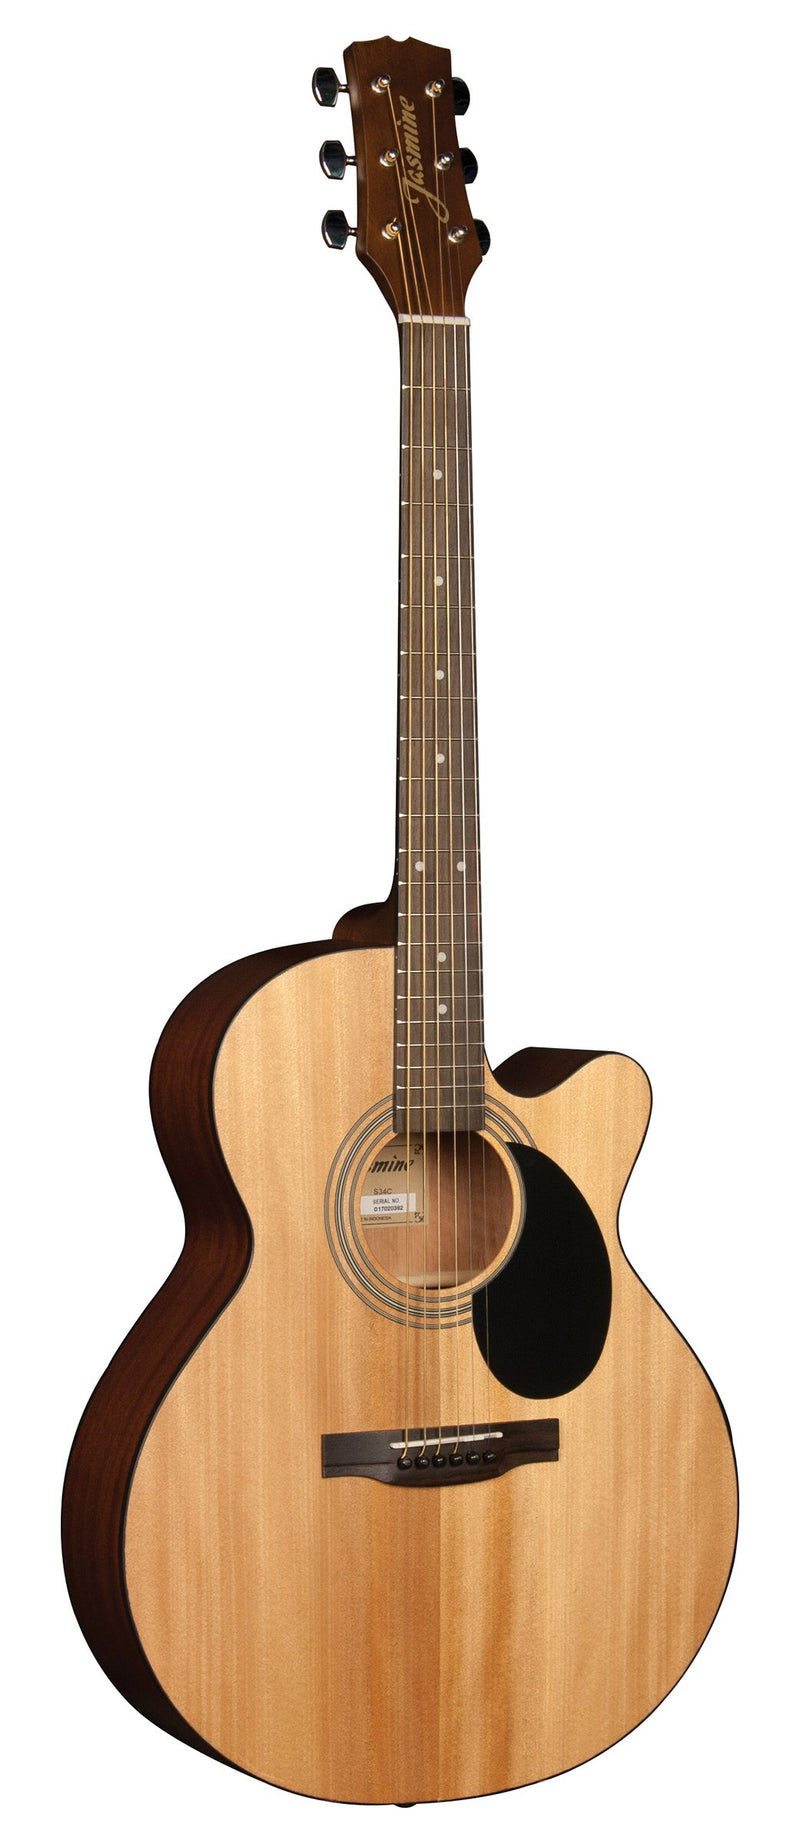 Jasmine Orchestra Style Acoustic Guitar - Natural - S34C